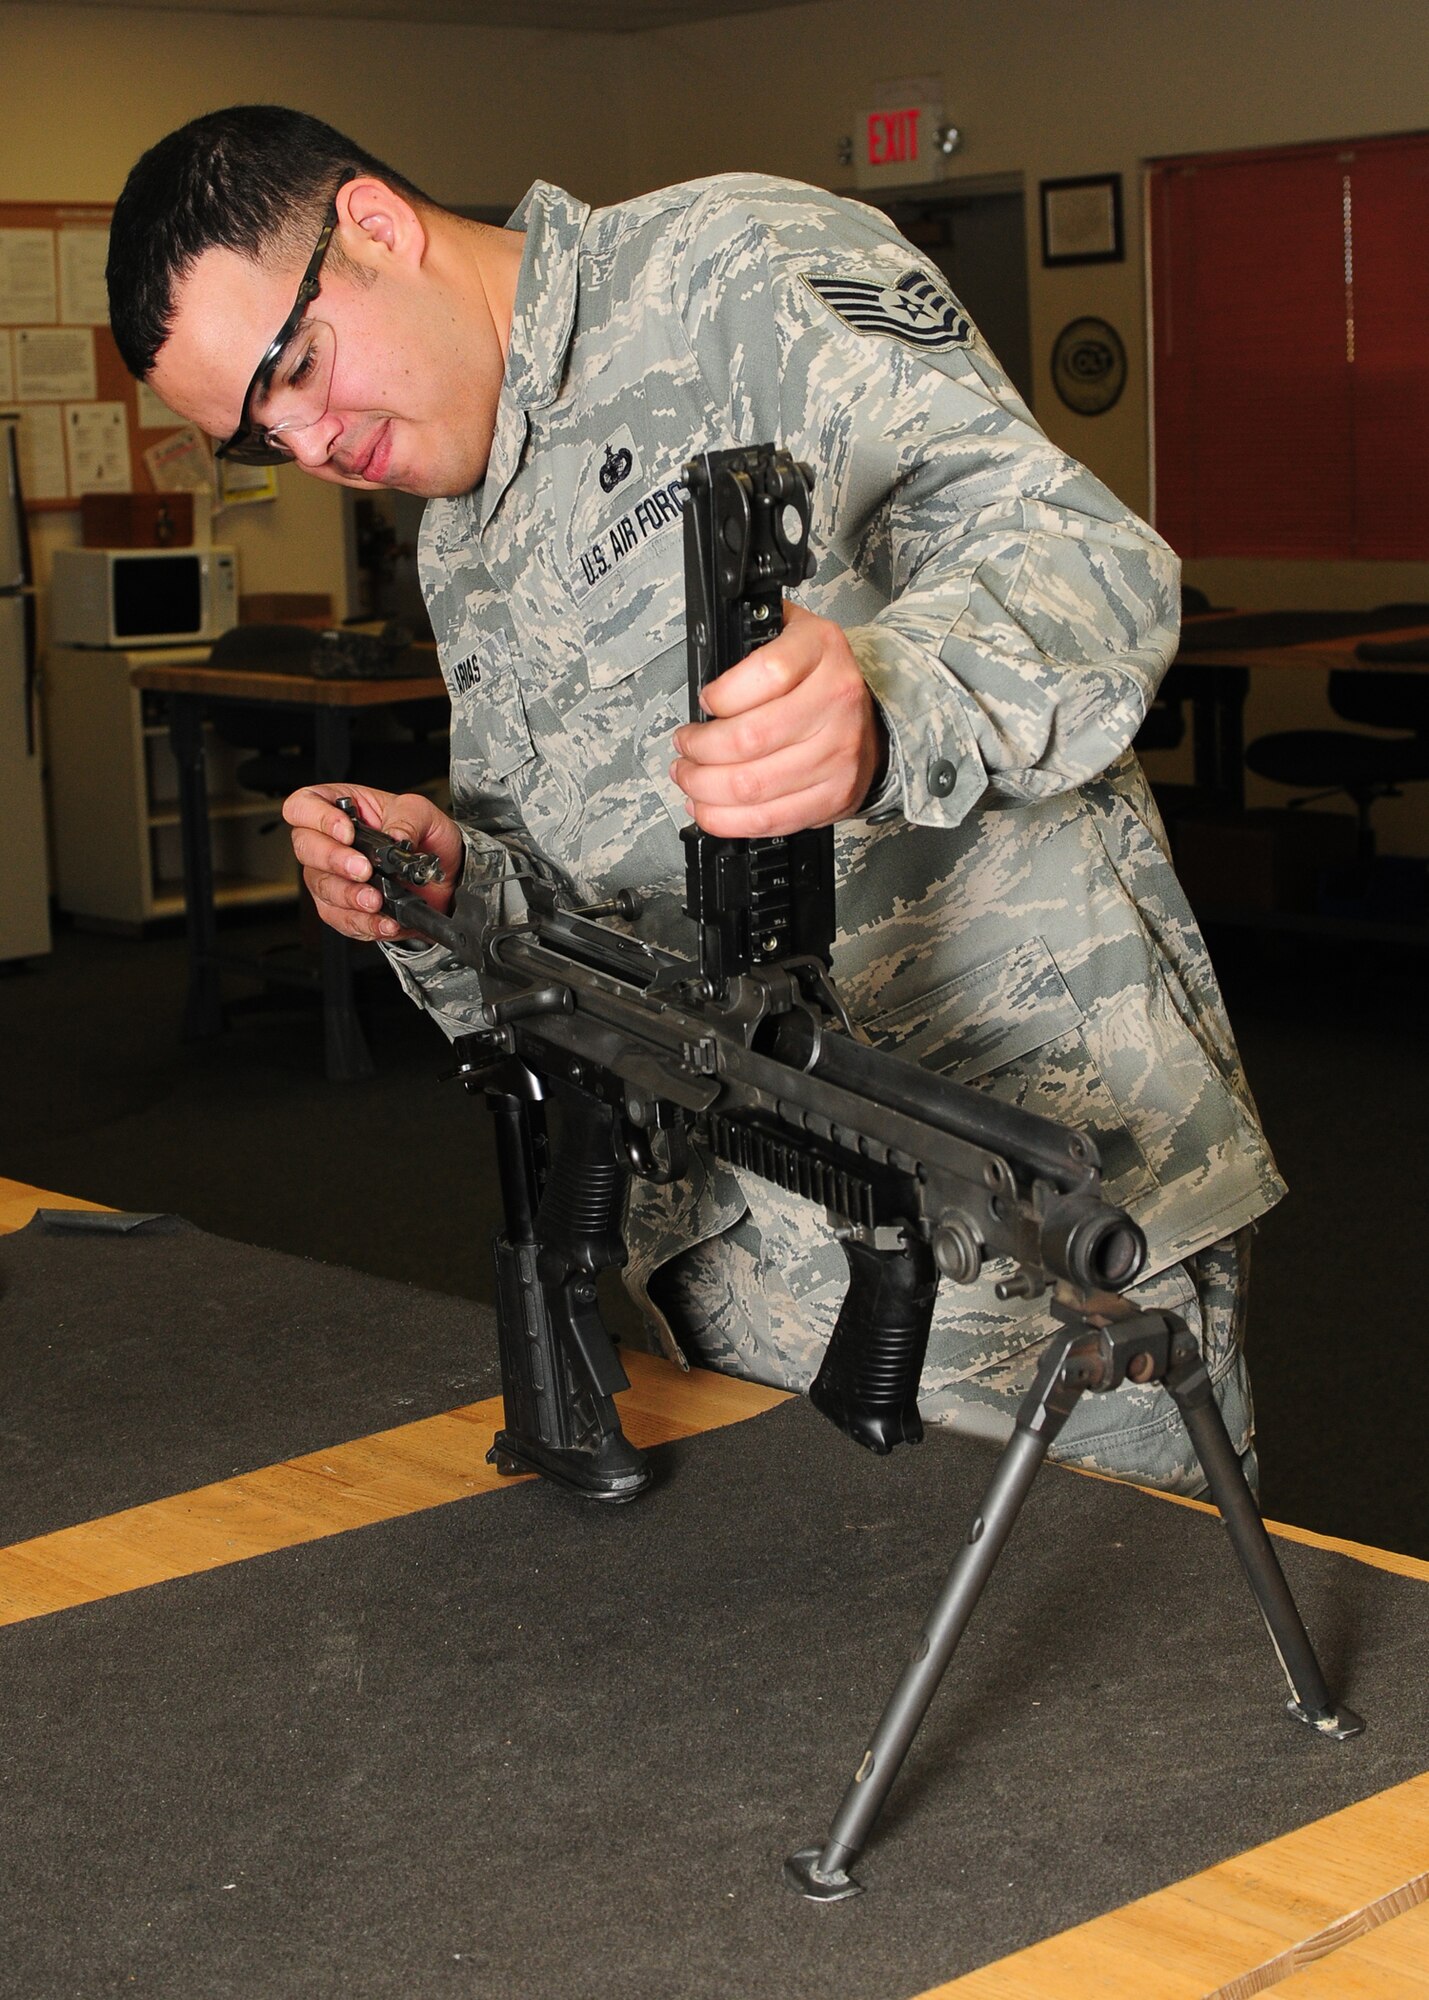 Tech. Sgt. Jesus Arias, 9th Security Forces Squadron NCO in charge of combat arms, breaks down and inspects a M-249 light machine gun at the combat arms facility on Beale Air Force Base, Calif., Jan. 10, 2013. Arias and his team inspect and clean each weapon to ensure they are serviceable for students qualifying on the firing range. (U.S. Air Force photo by Senior Airman Allen Pollard/Released)